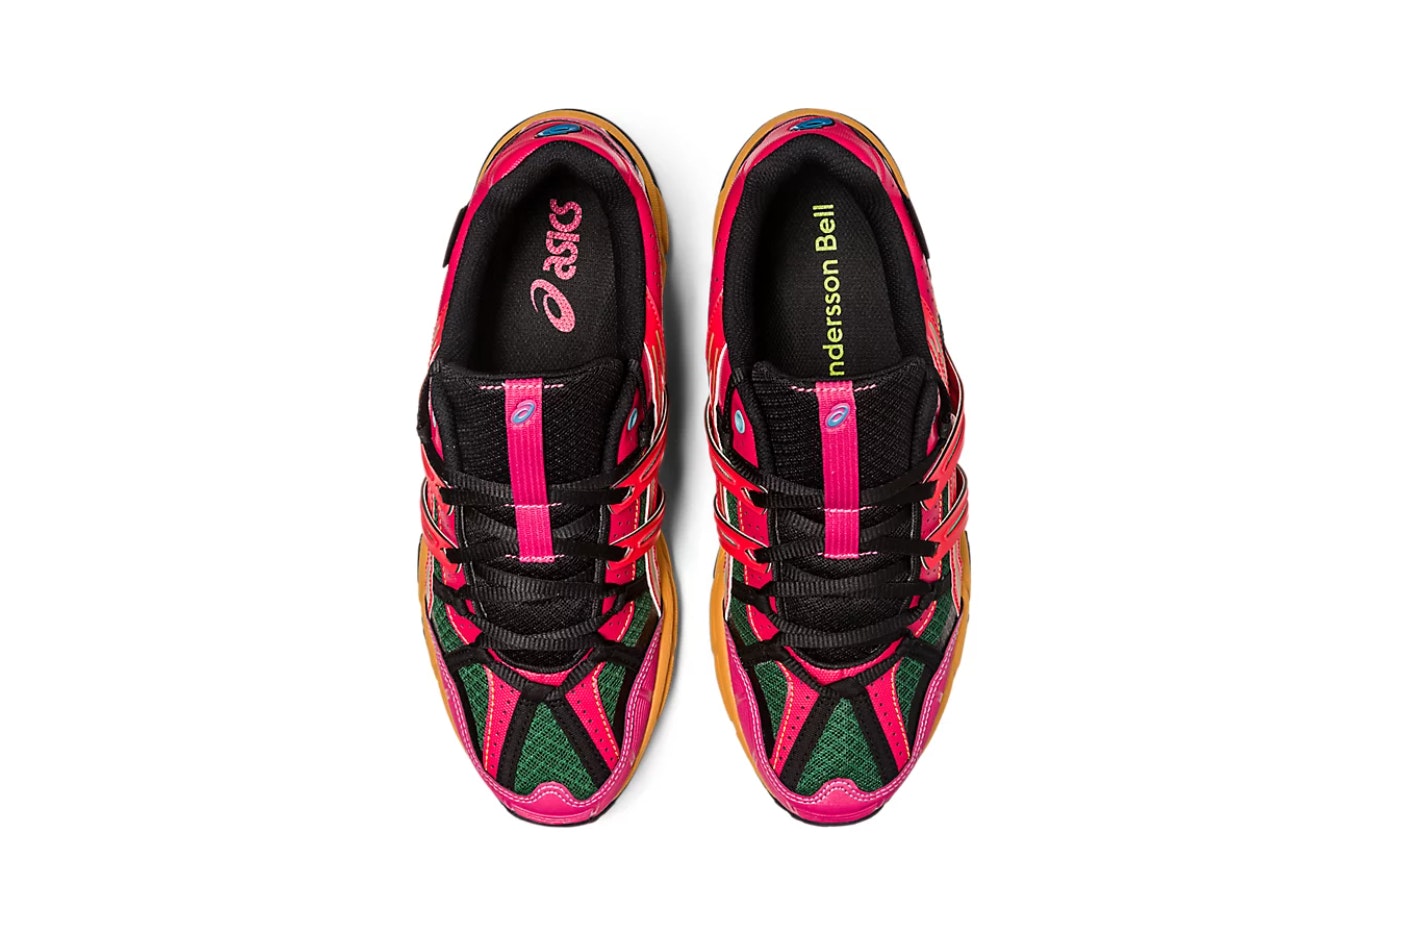 Andersson Bell x Asics Gel Sonoma 15-50 "Bright Rose"